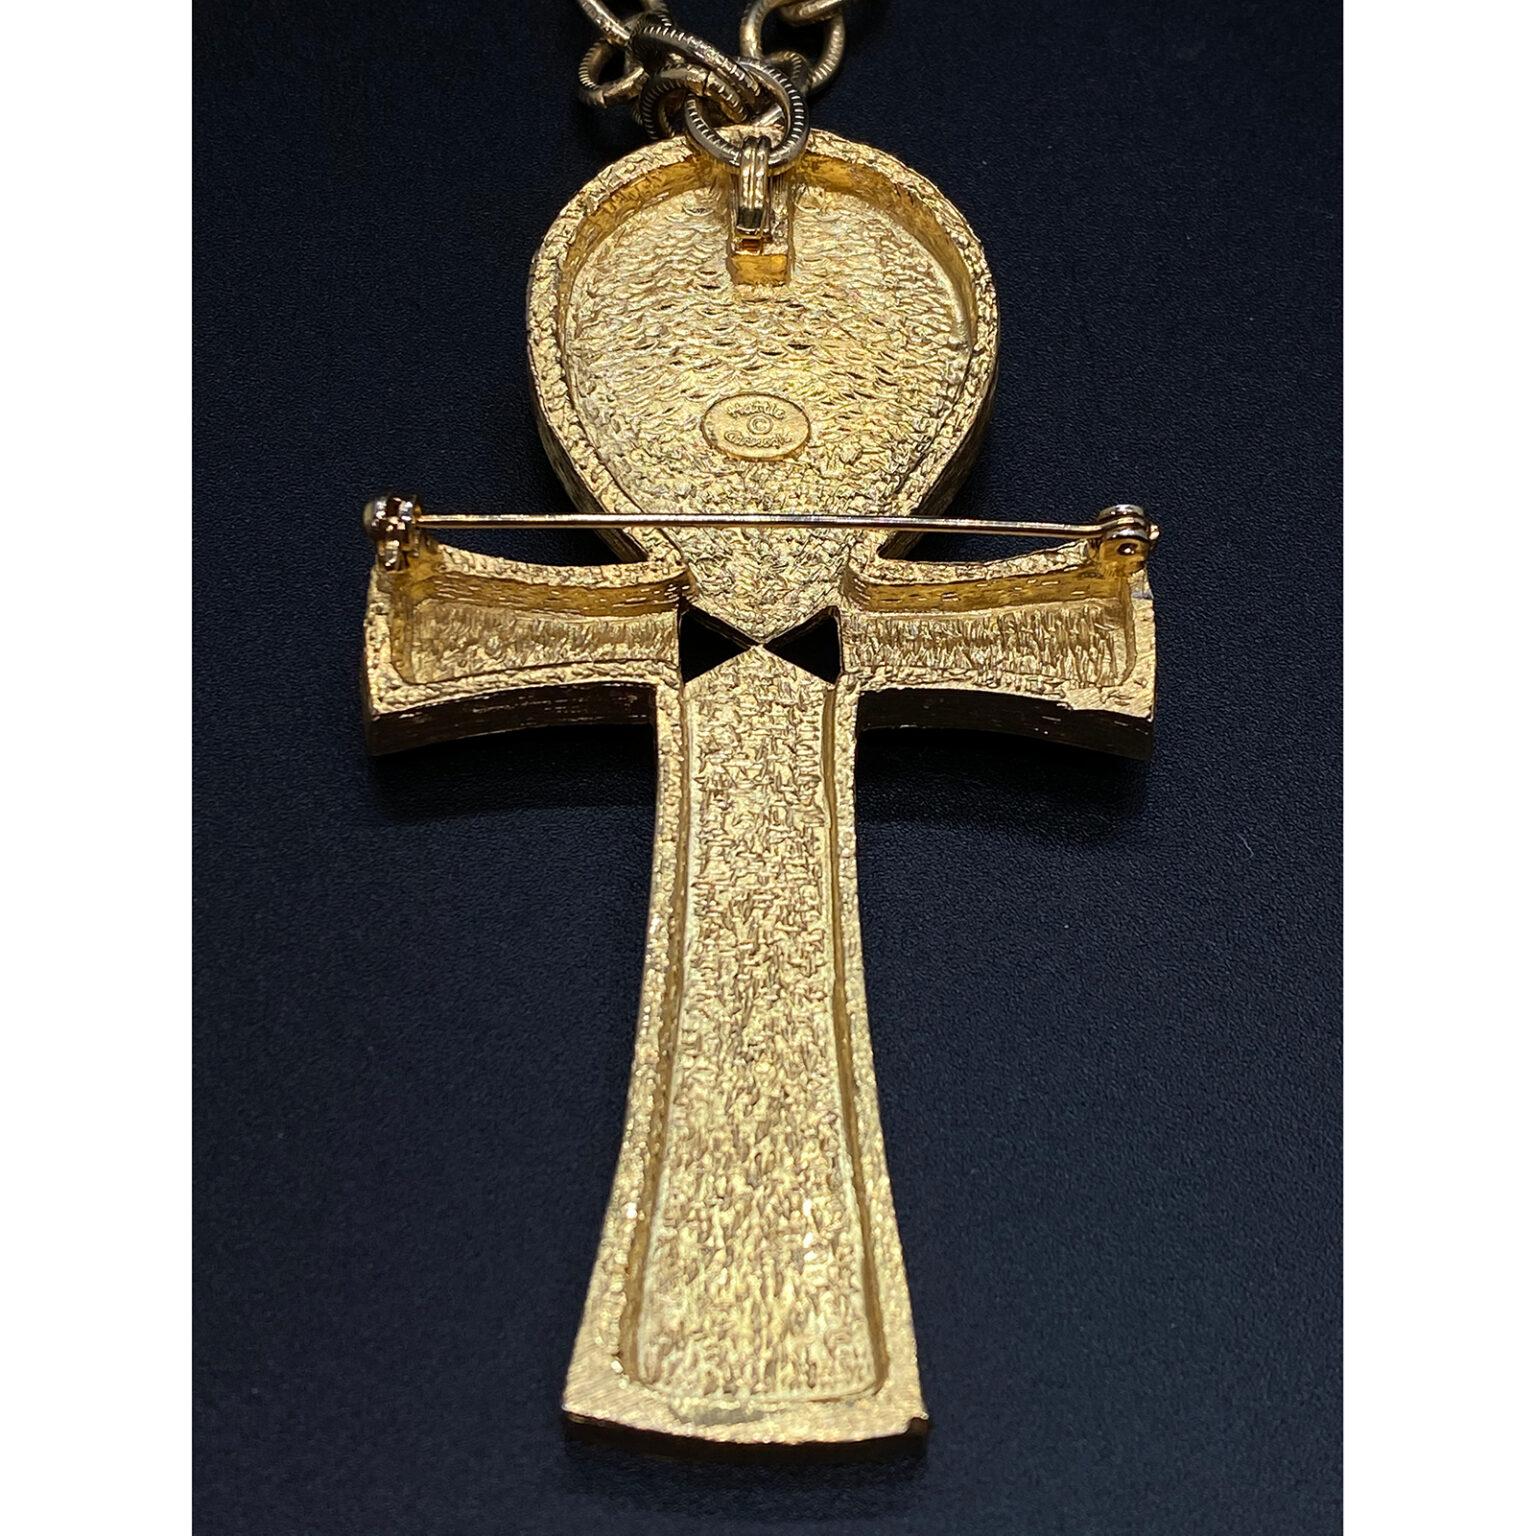 Hattie Carnegie Egyptian Revival Ankh Necklace with pendant-brooch